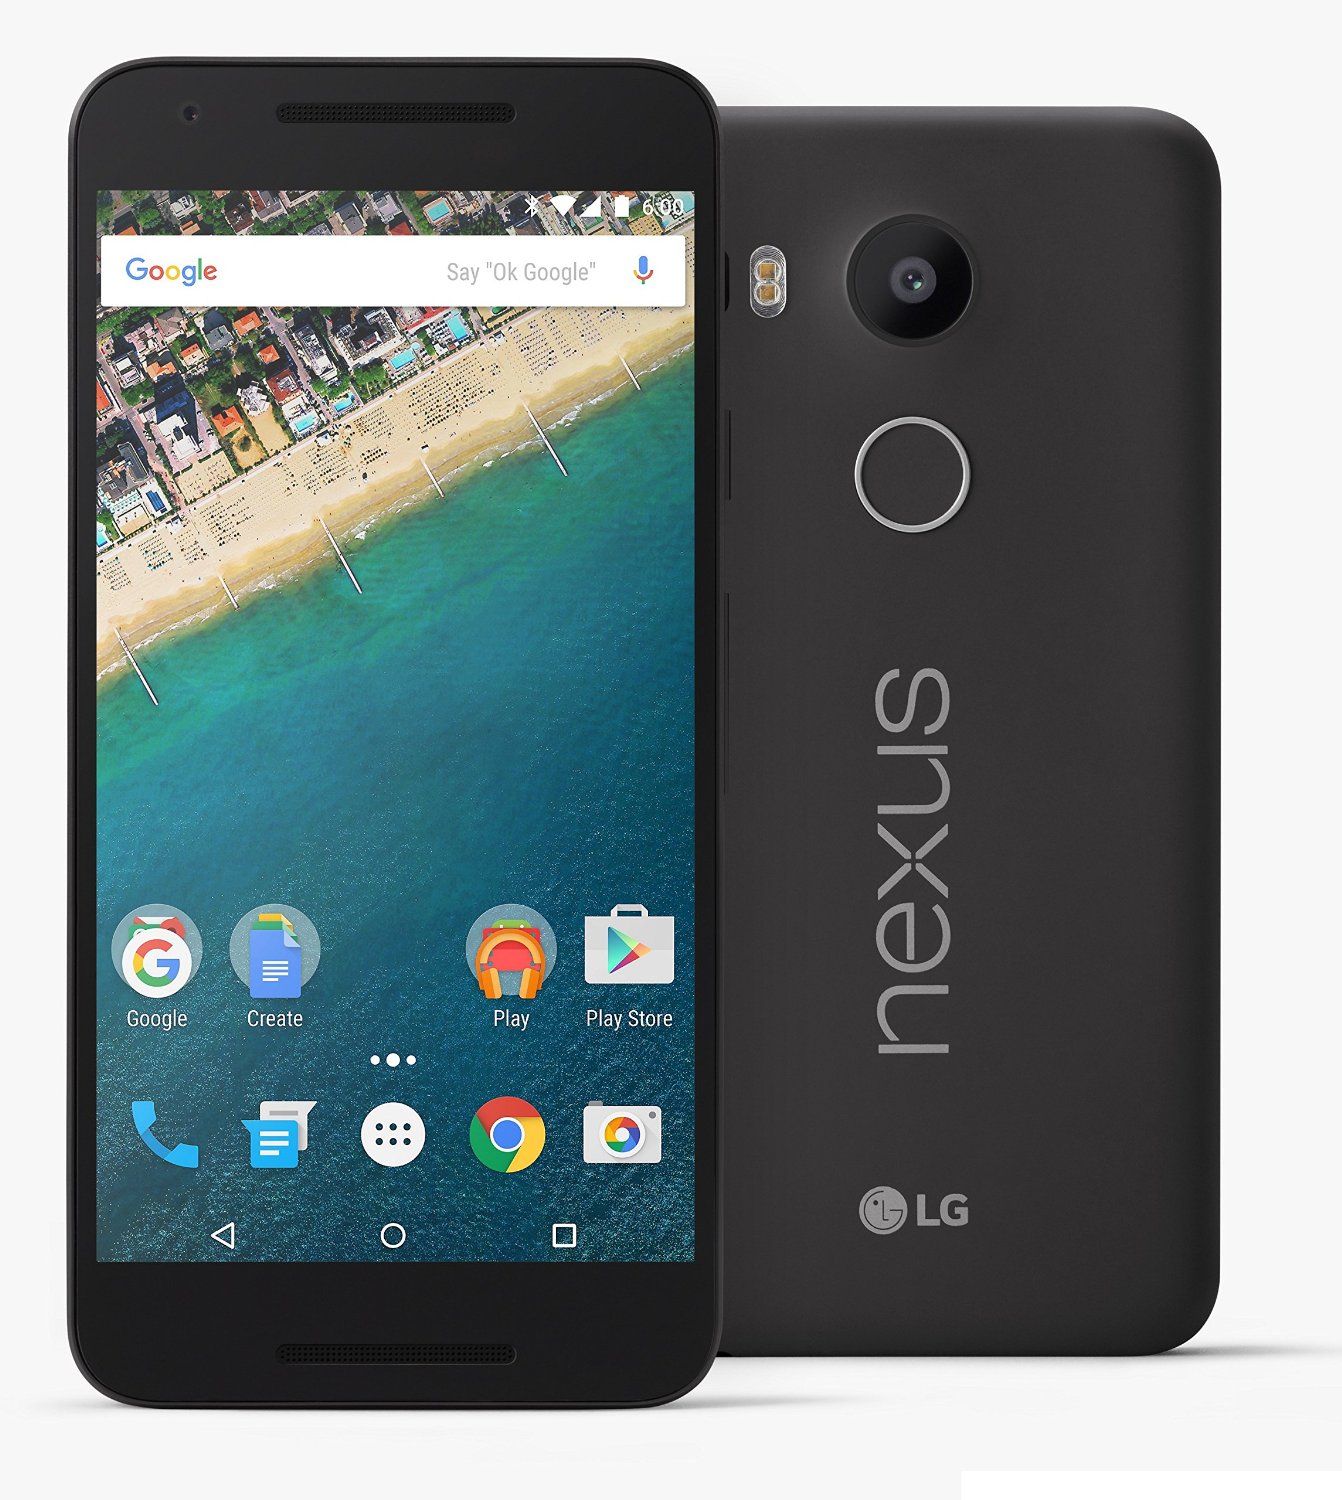 LG Google Nexus 5X Features,Price and Offers